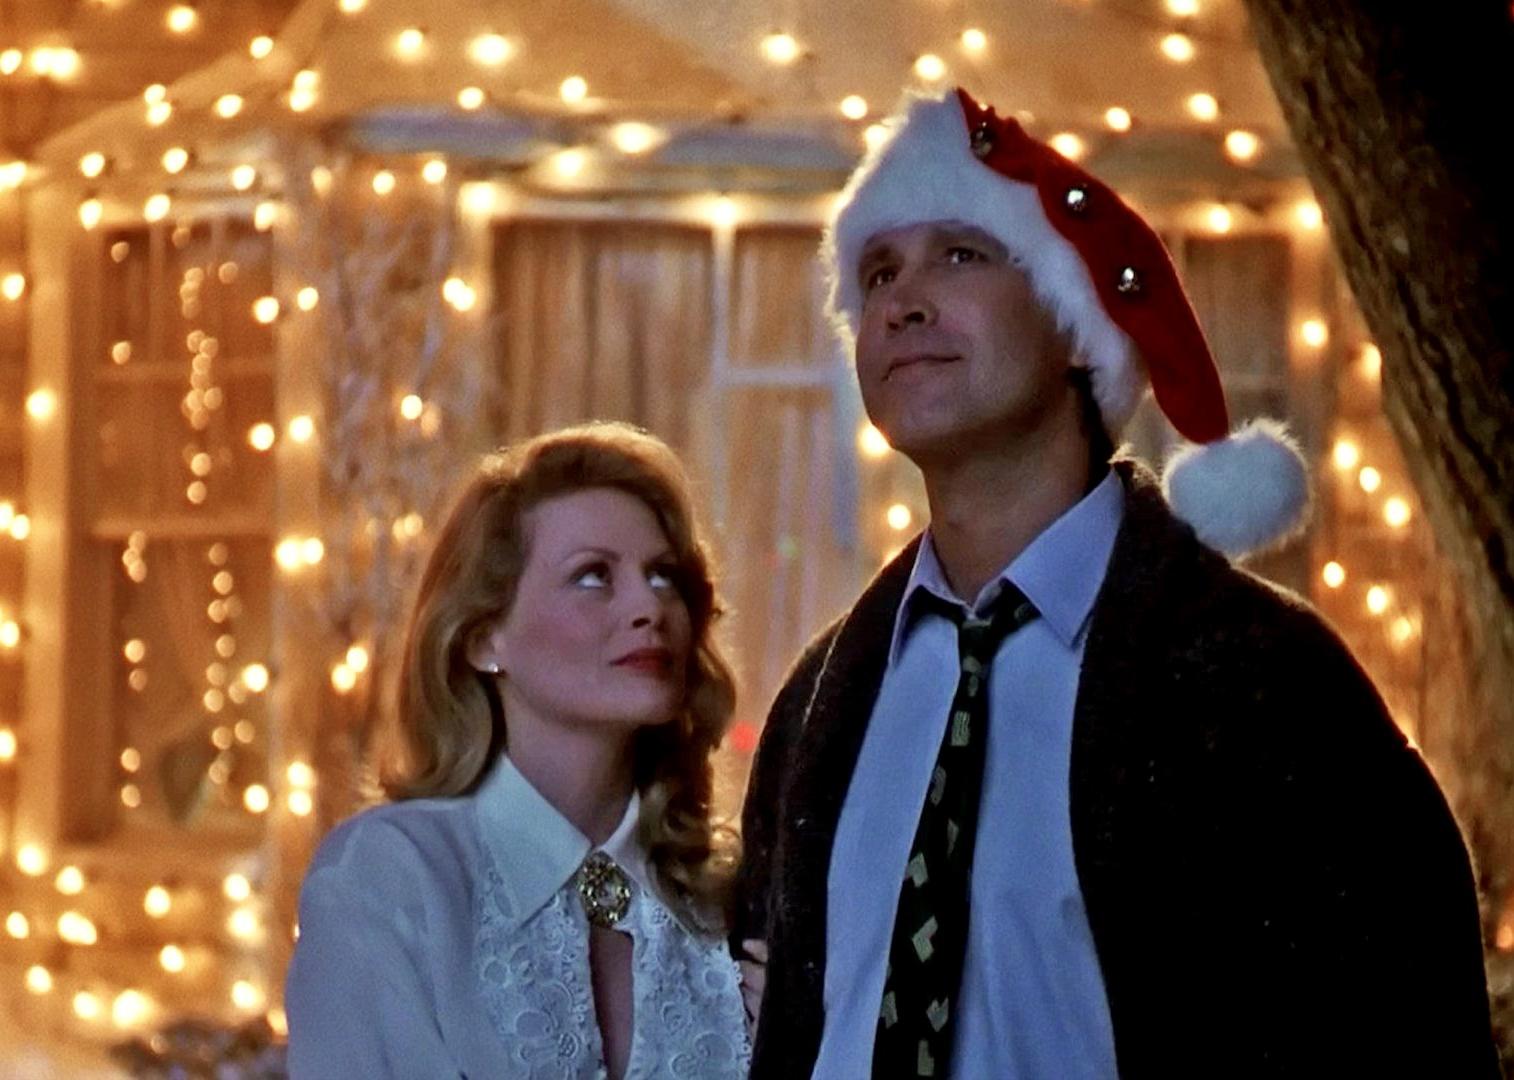 Beverly D'Angelo and Chevy Chase look up at the Christmas lights in their home.